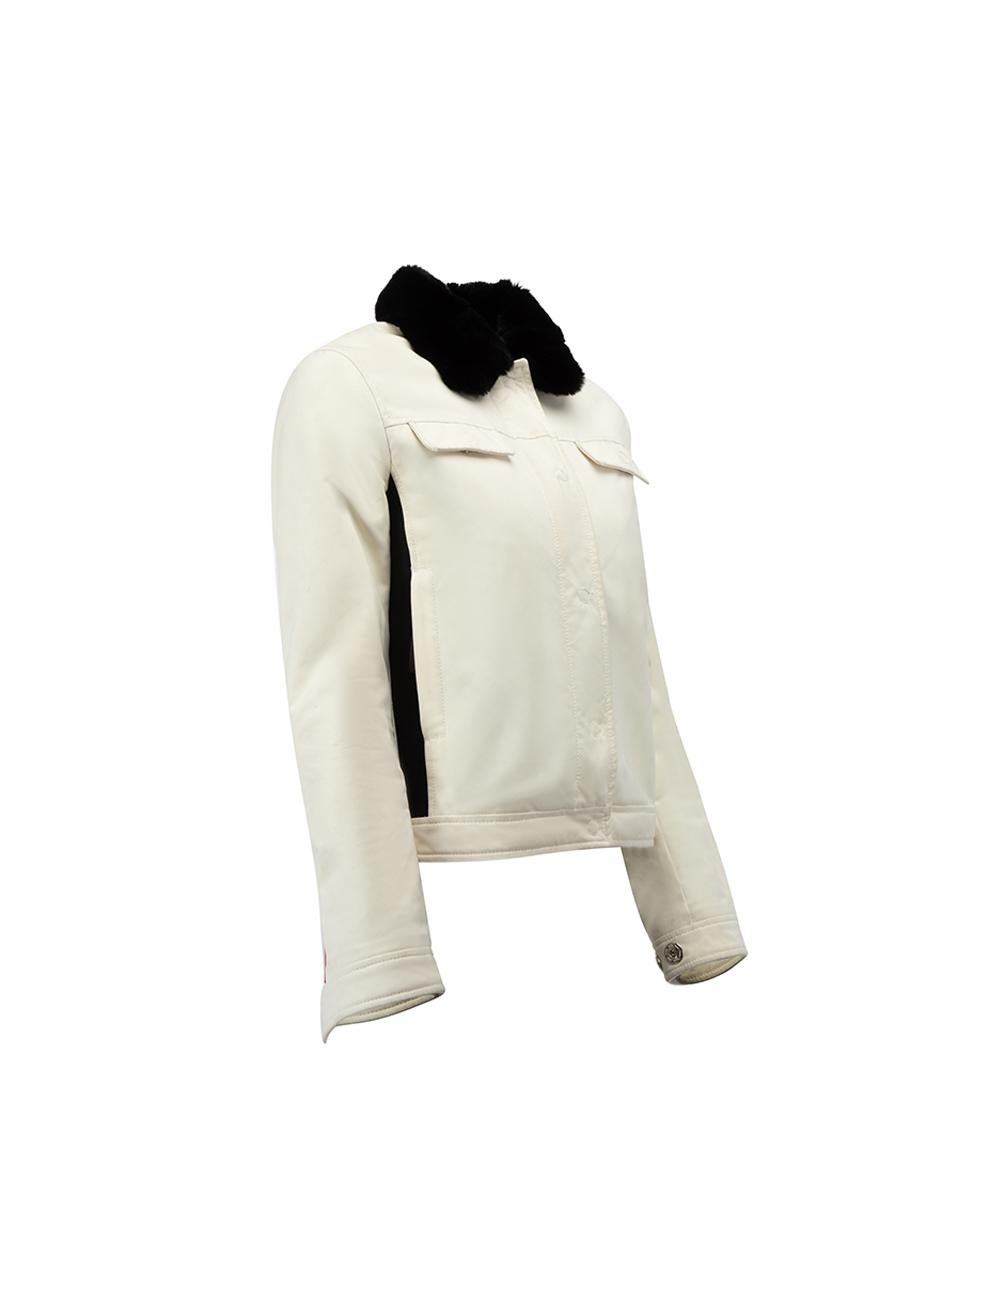 CONDITION is Very good. Minimal wear to jacket is evident. Minimal wear to the outer white fabric which has marks all over and two of the popper buttons are broken on this used Prada designer resale item. 
 
 Details
  White
 Synthetic
 Shell short